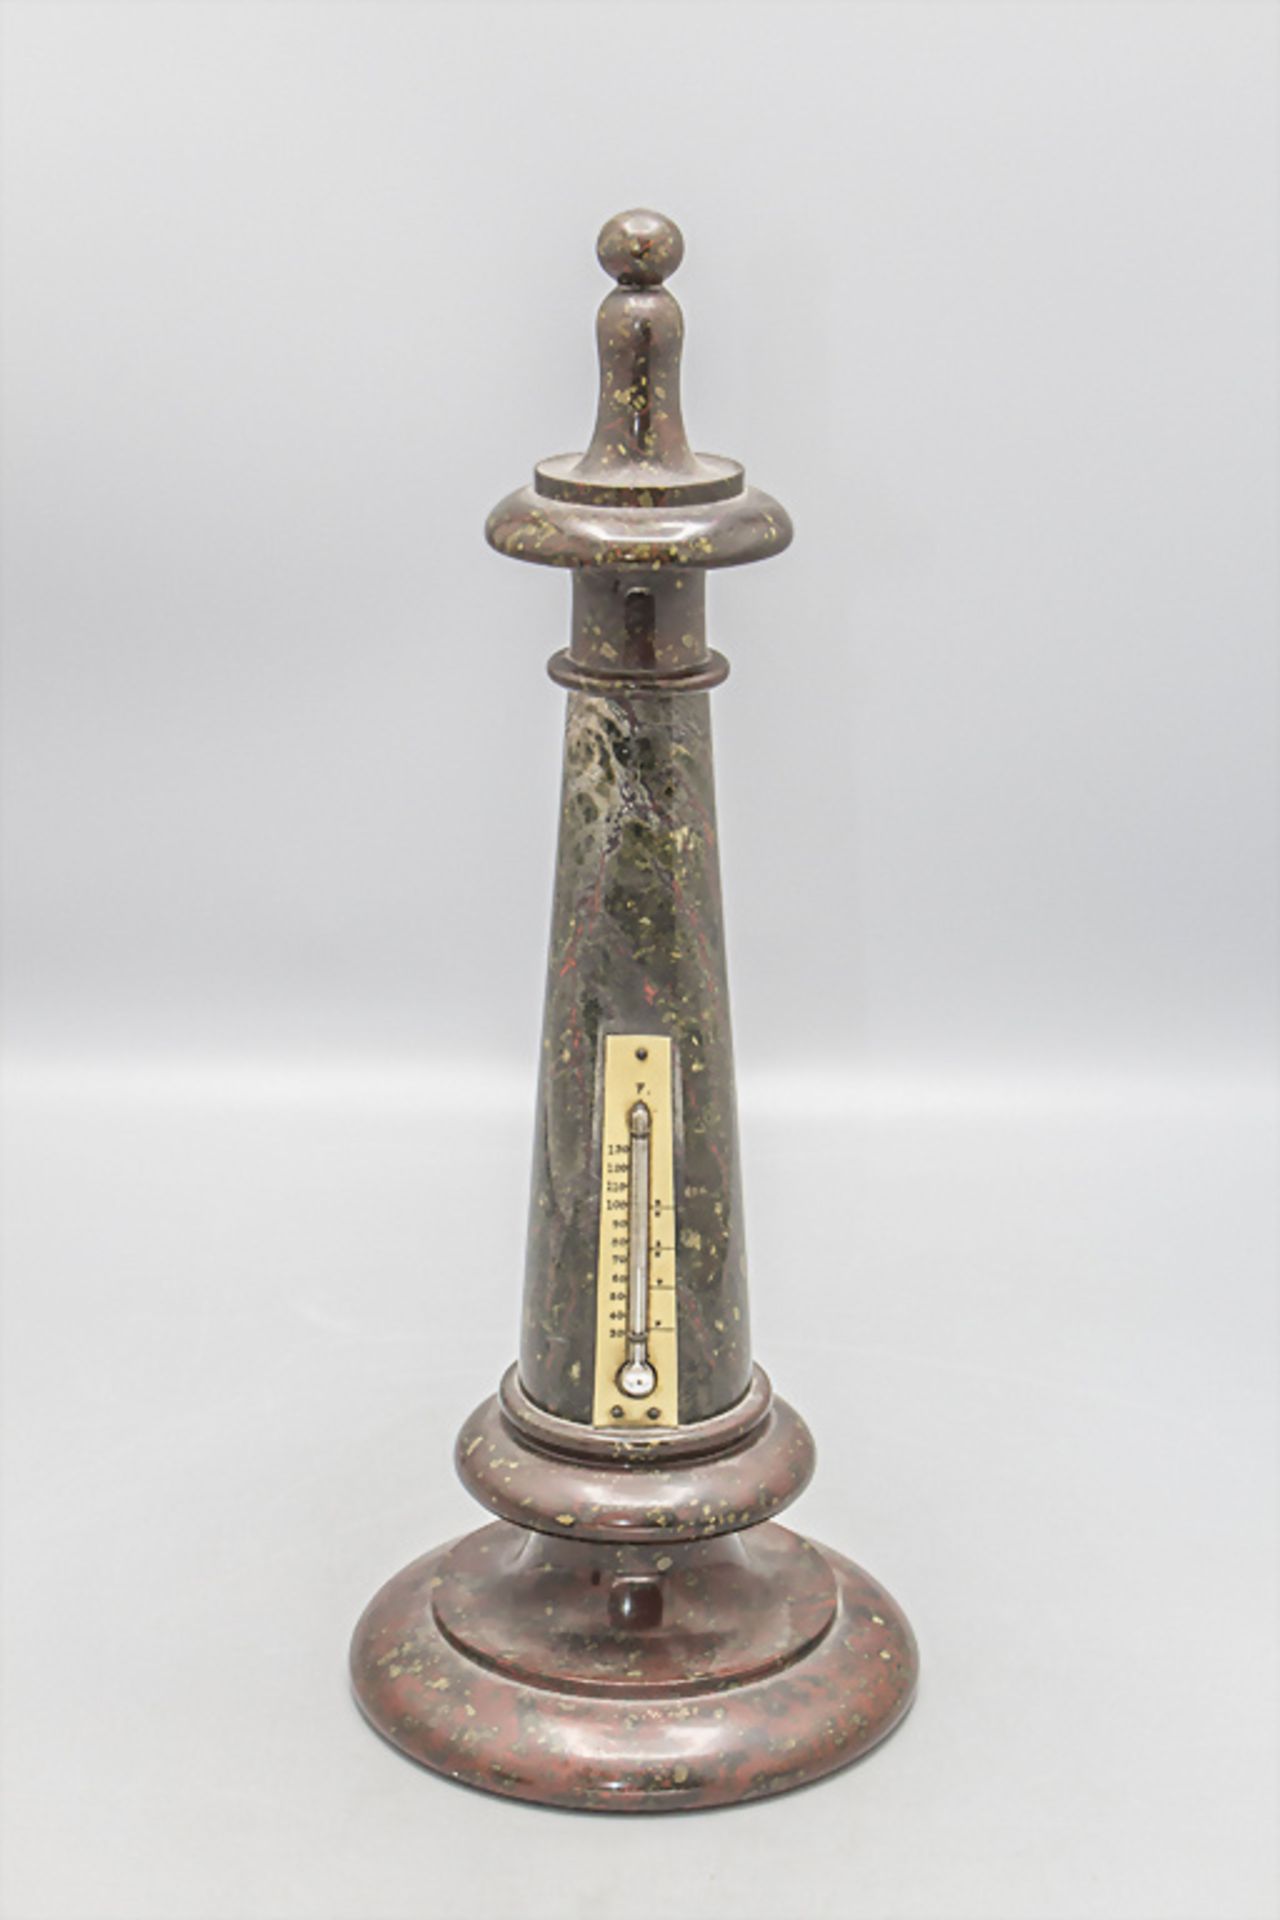 Marmorsäule mit Thermometer / A marble column with a thermometer, Ende 19. Jh.